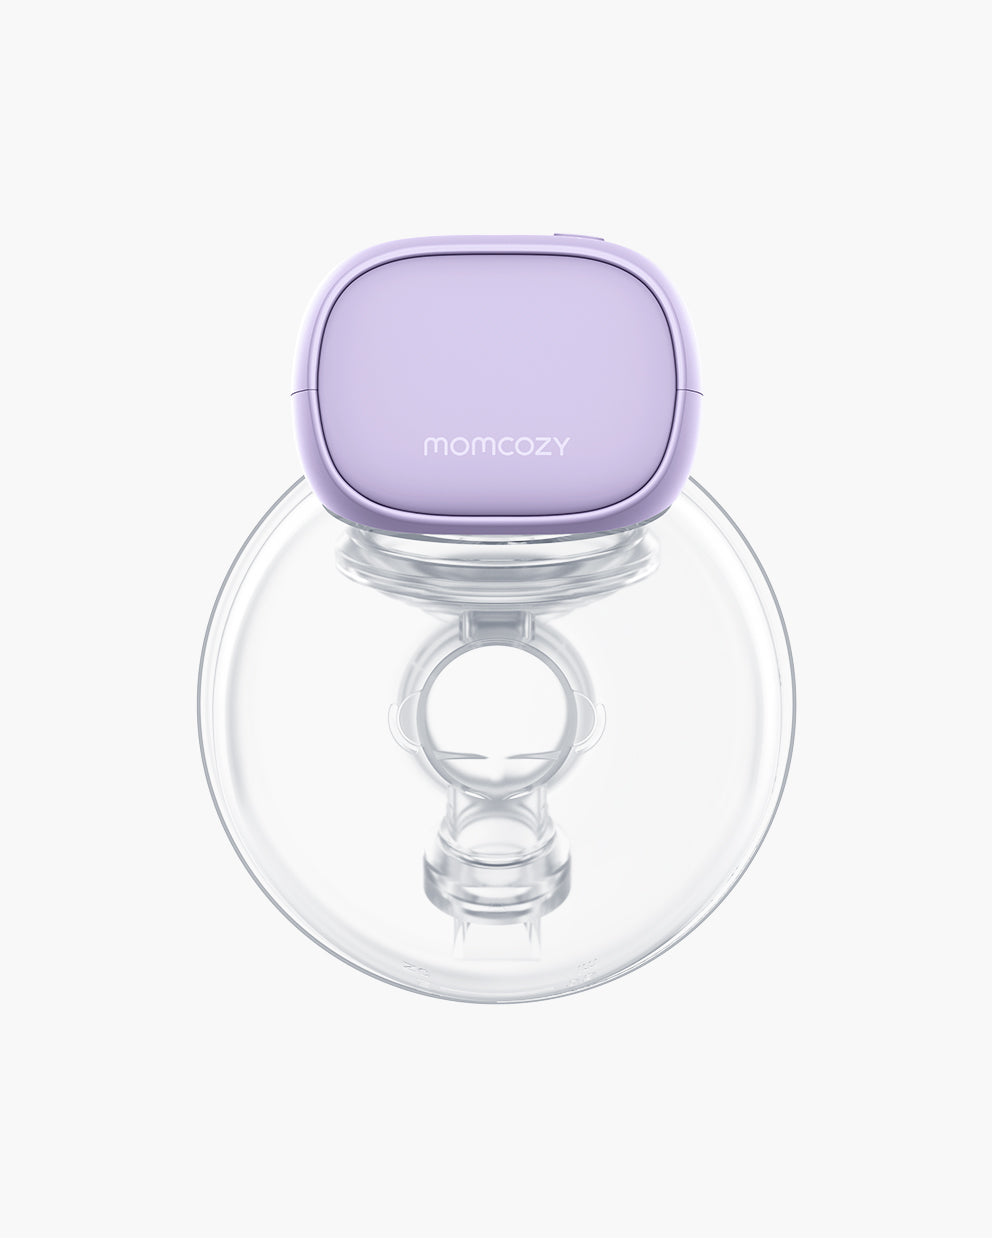 Momcozy S9 Pro Wearable Breast Pump, Hands-Free Breast Pump of